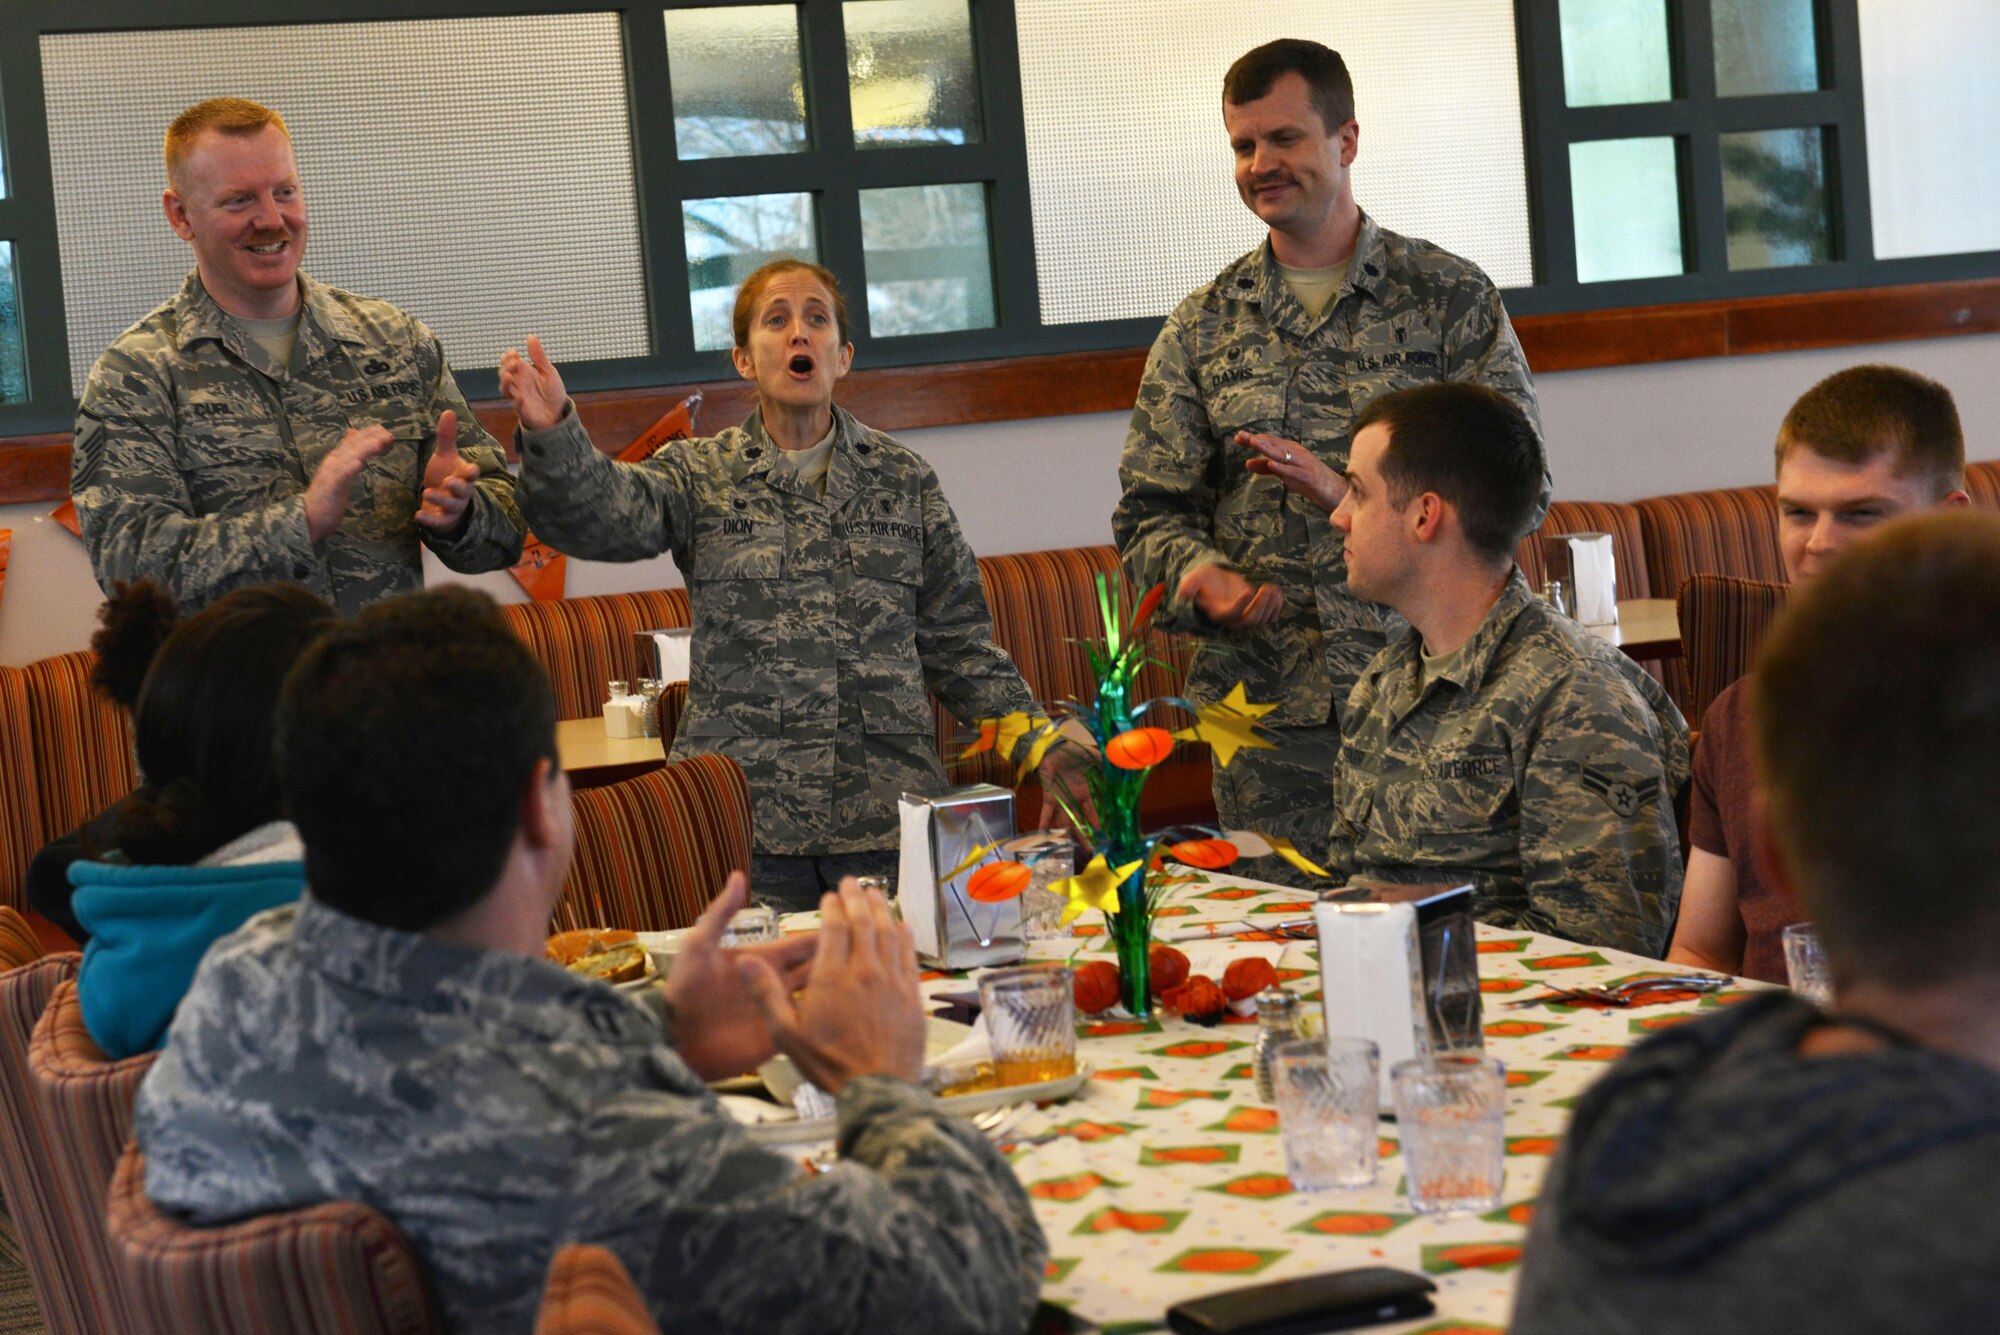 Leadership from the 20th Fighter Wing sing “Happy Birthday” to Airmen during a birthday dinner at Shaw Air Force Base, S.C., March 15, 2017. Monthly birthday dinners are an opportunity for Airmen to network with others and for their leadership to mentor them. (U.S. Air Force photo by Airman 1st Class Destinee Sweeney)